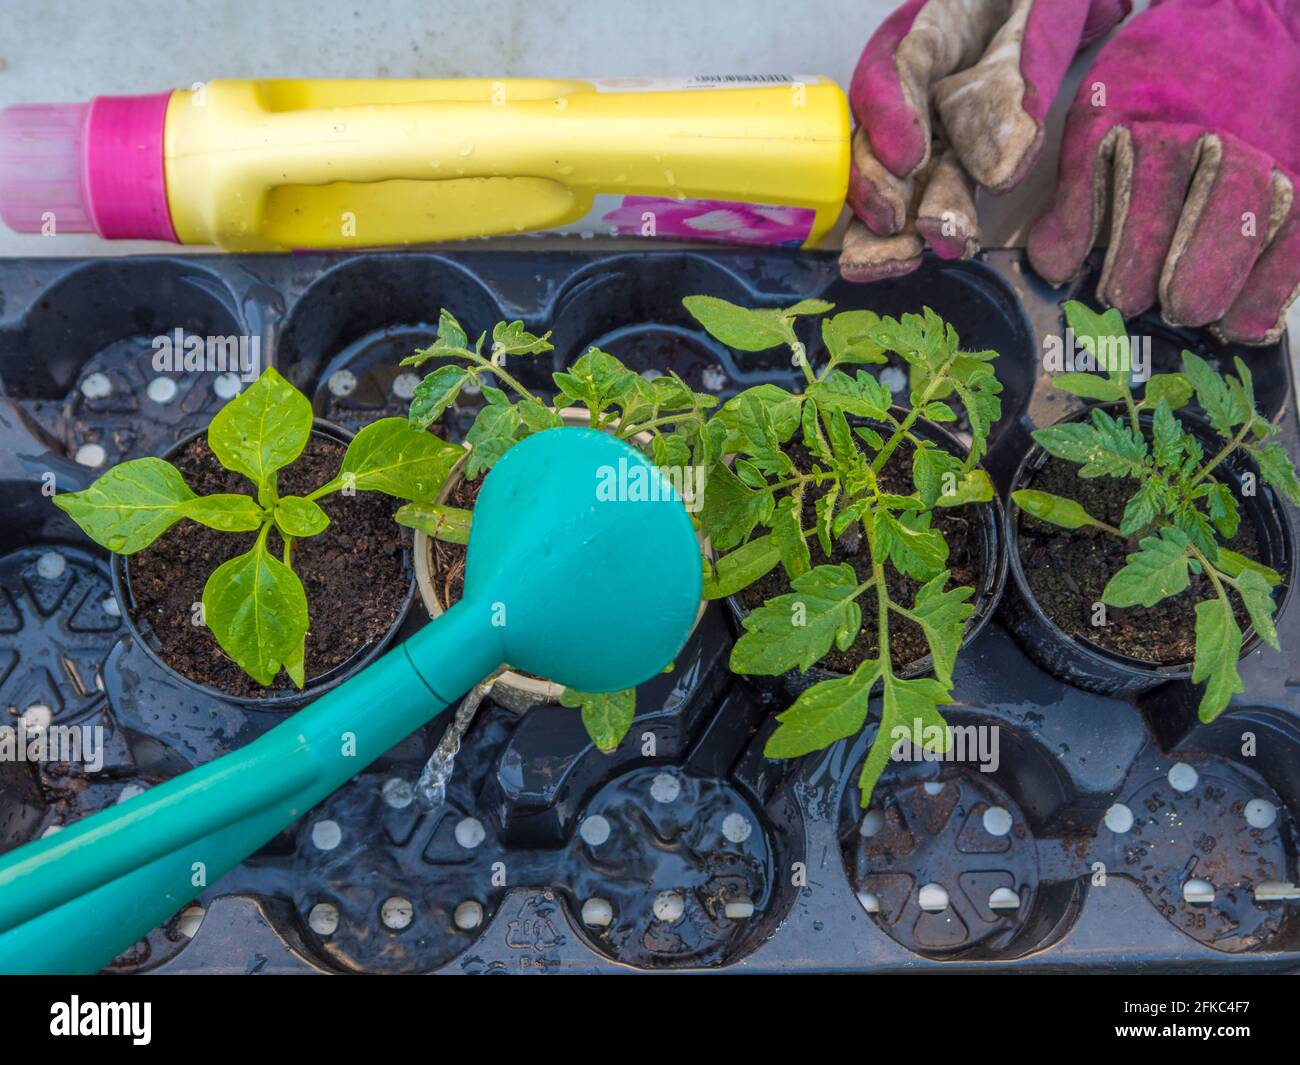 Closeup overhead shot of new plants in plastic pots being watered, with a bottle of liquid plant food and pair of gardening gloves in the background. Stock Photo